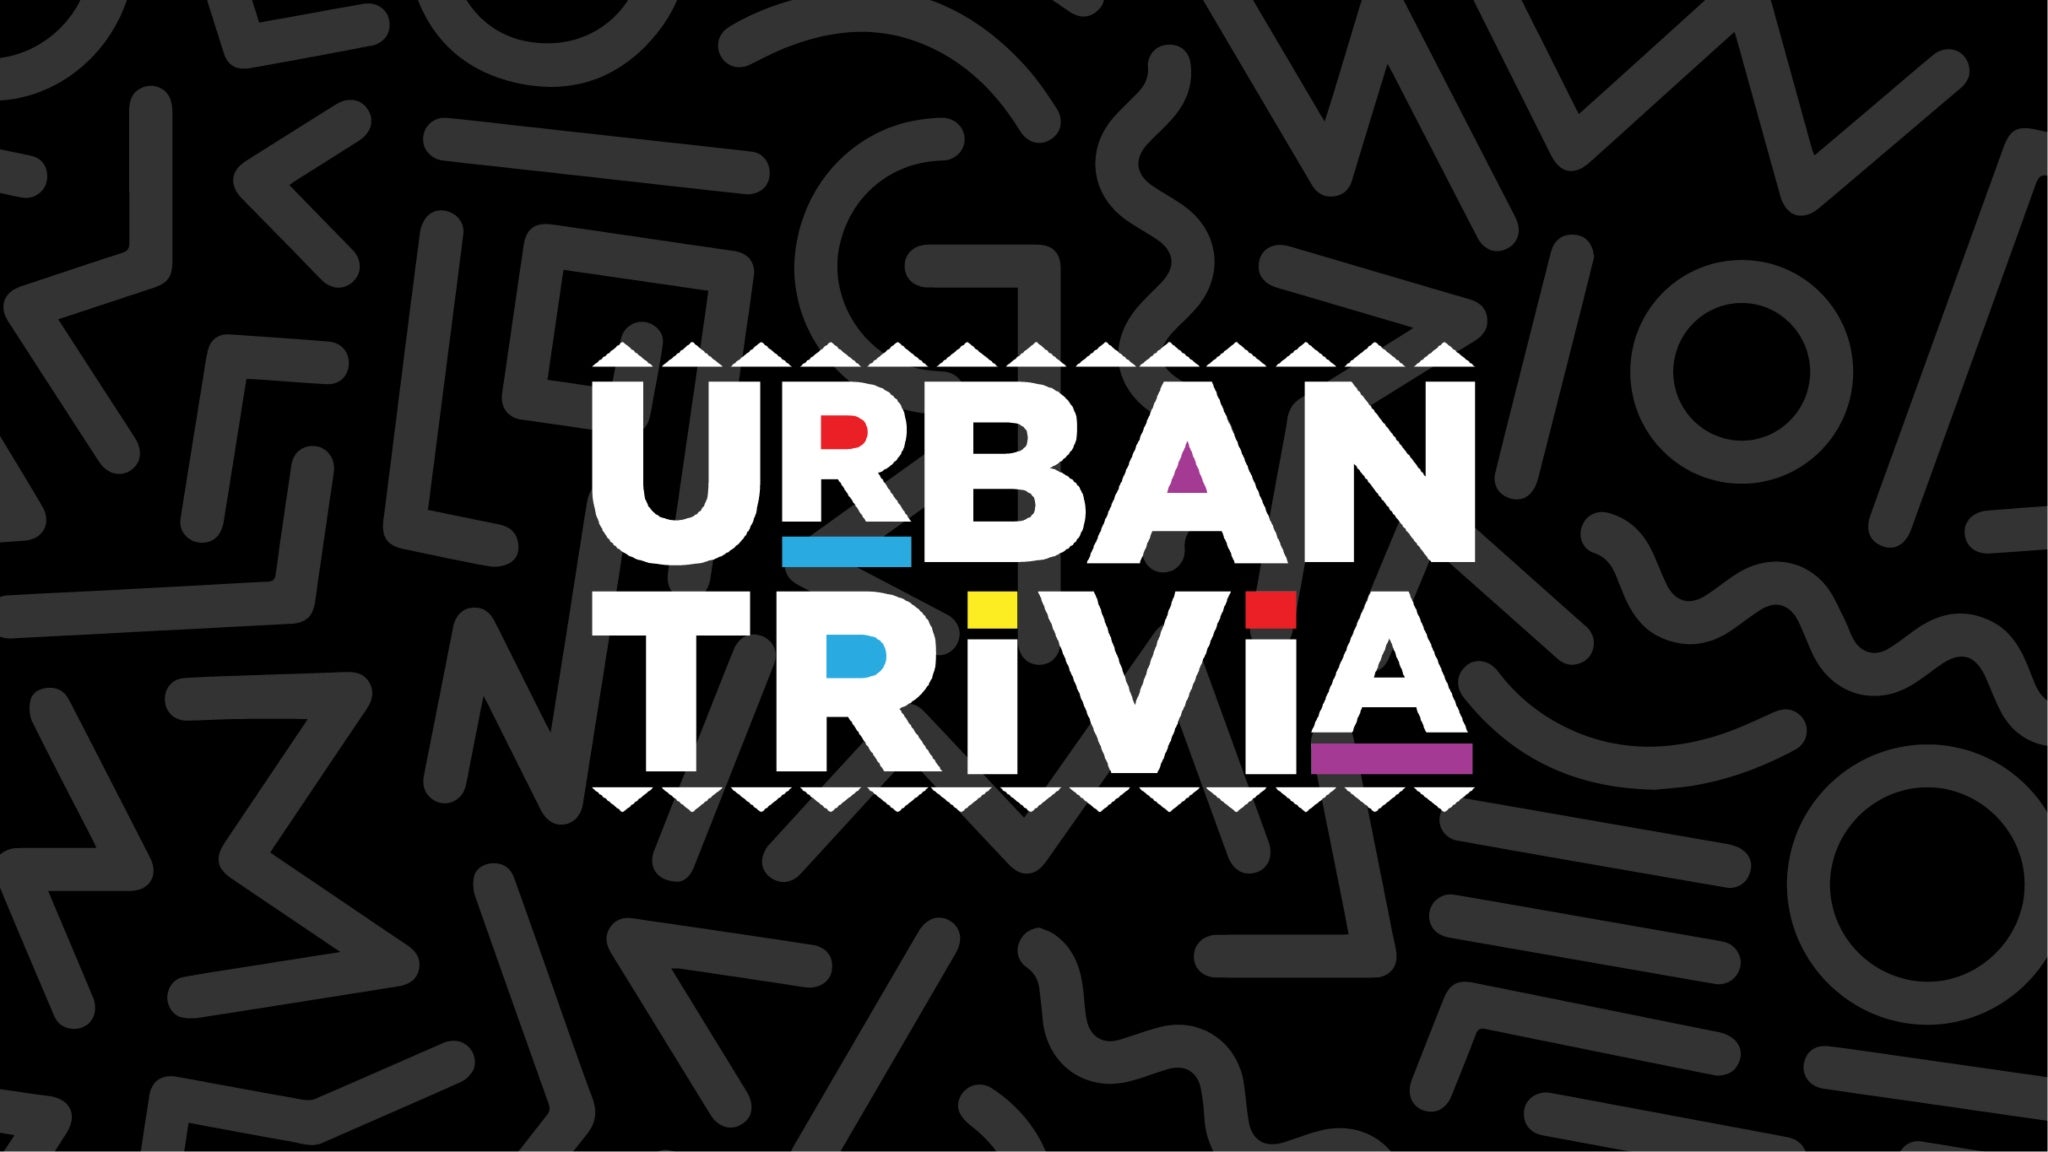 Urban Trivia Live at Center Stage Theater